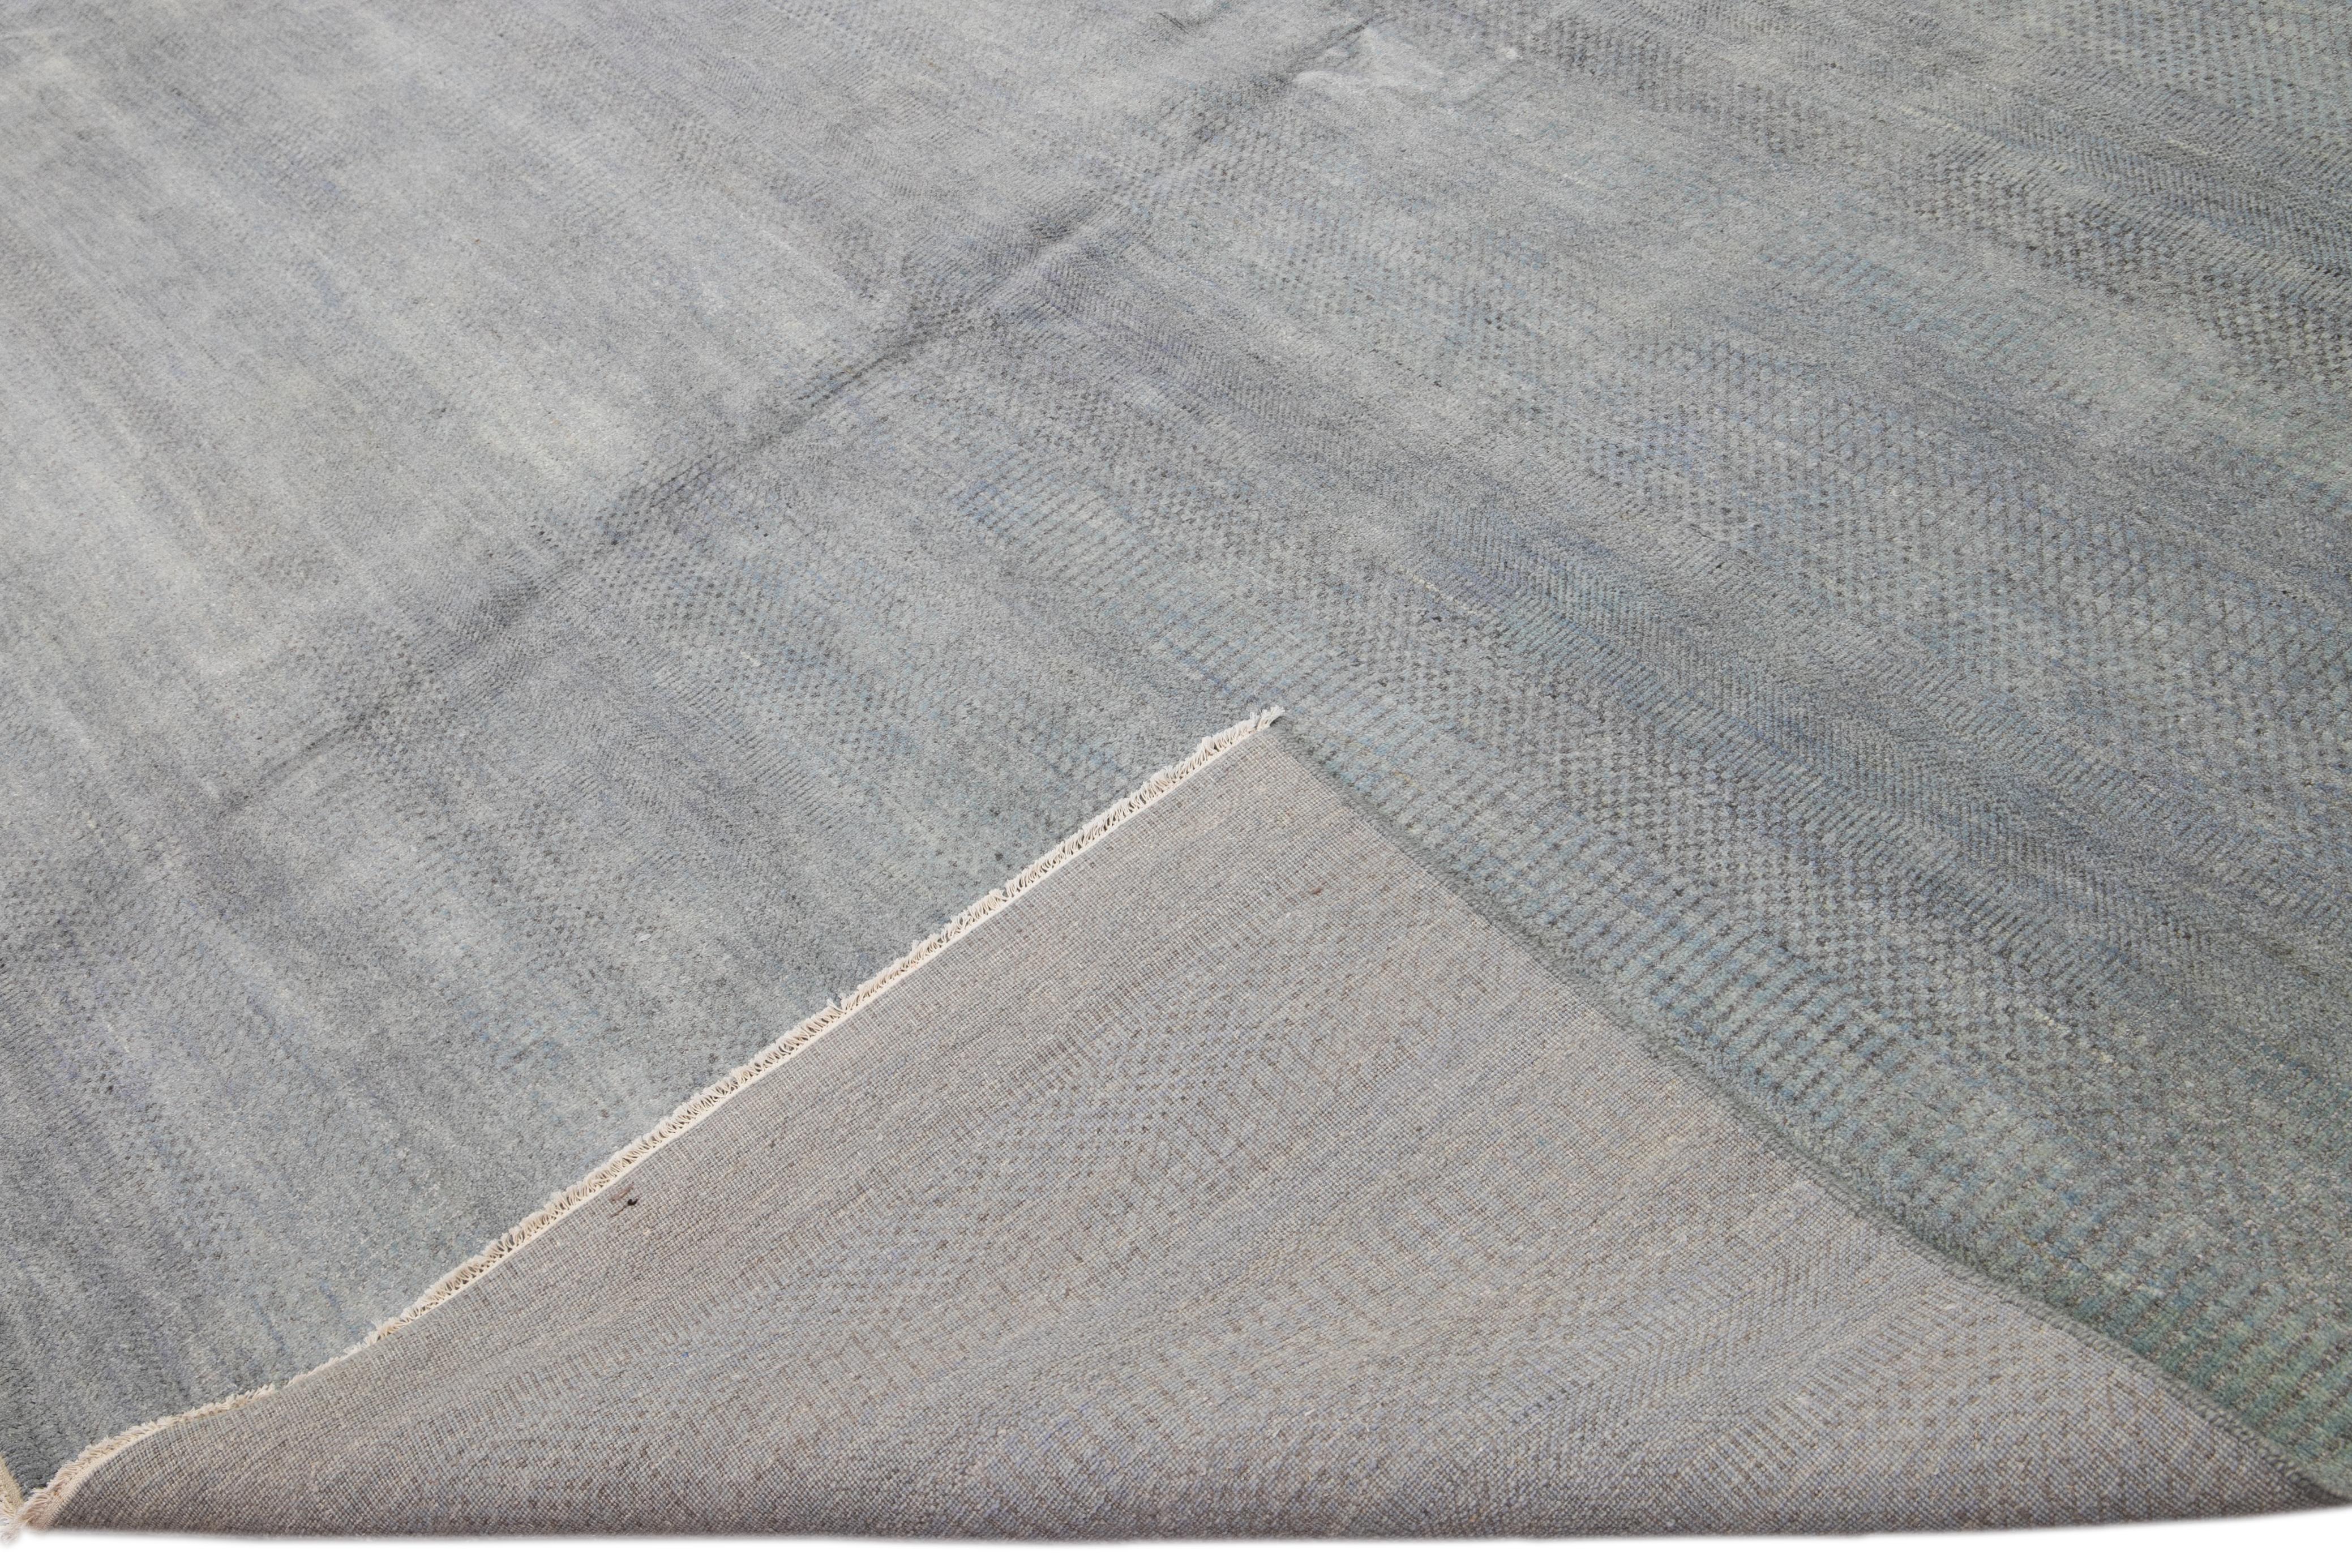 Beautiful Contemporary Savannah hand-knotted wool rug with a finely detailed gray field in an all-over geometric pattern design.

This rug measures: 16' x 22'9